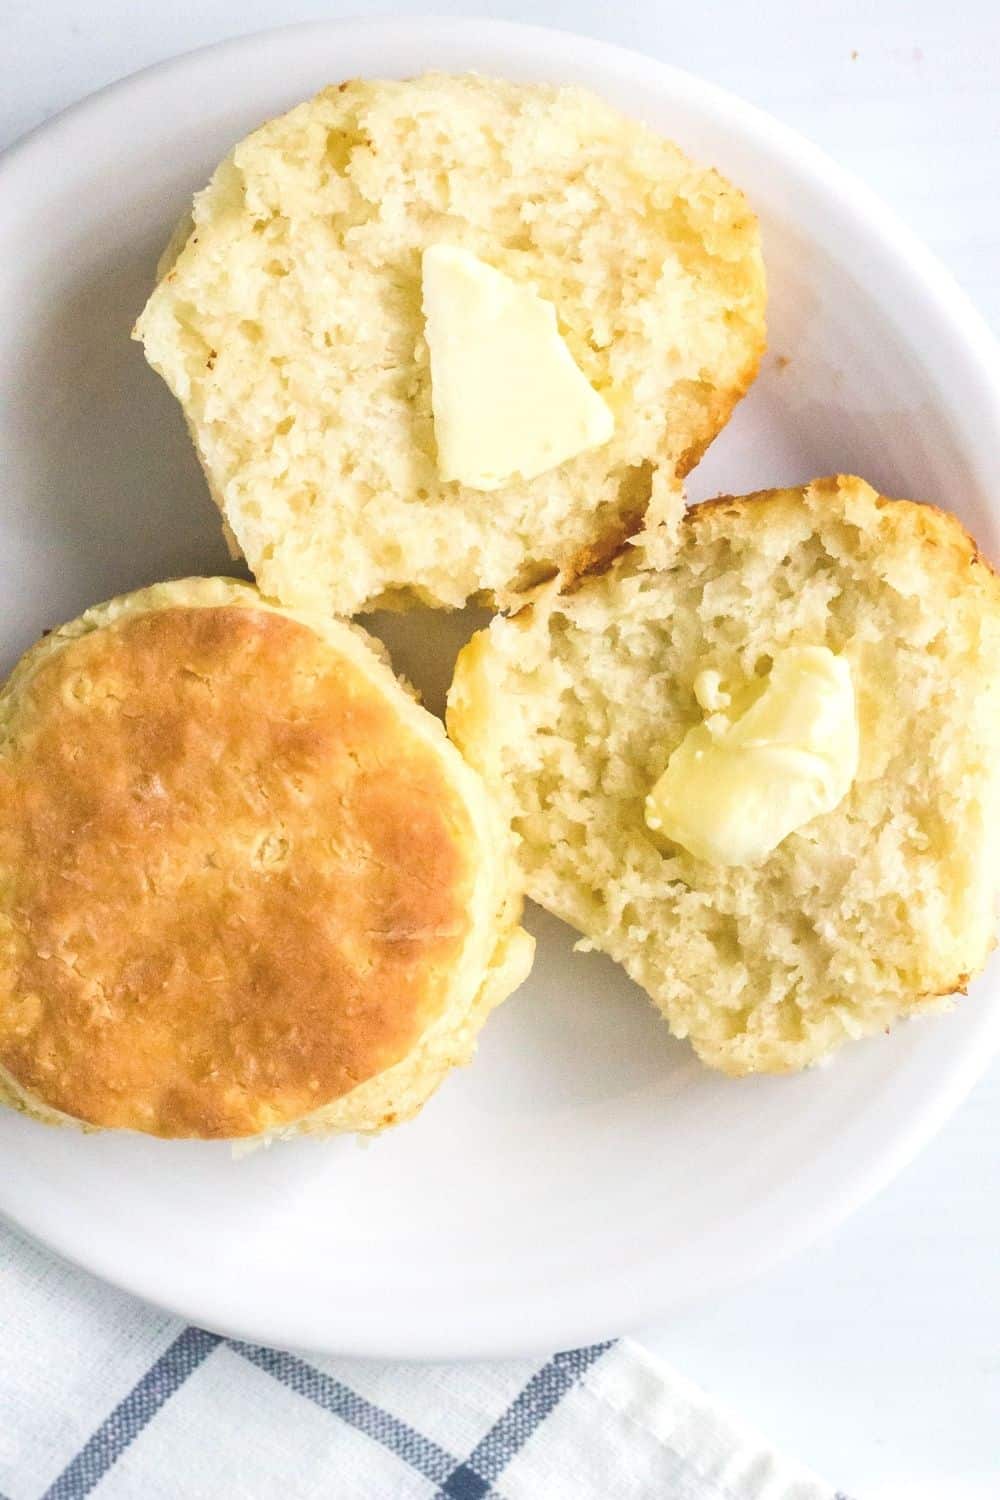 two easy homemade biscuits on a white plate, with one biscuit split open and buttered.